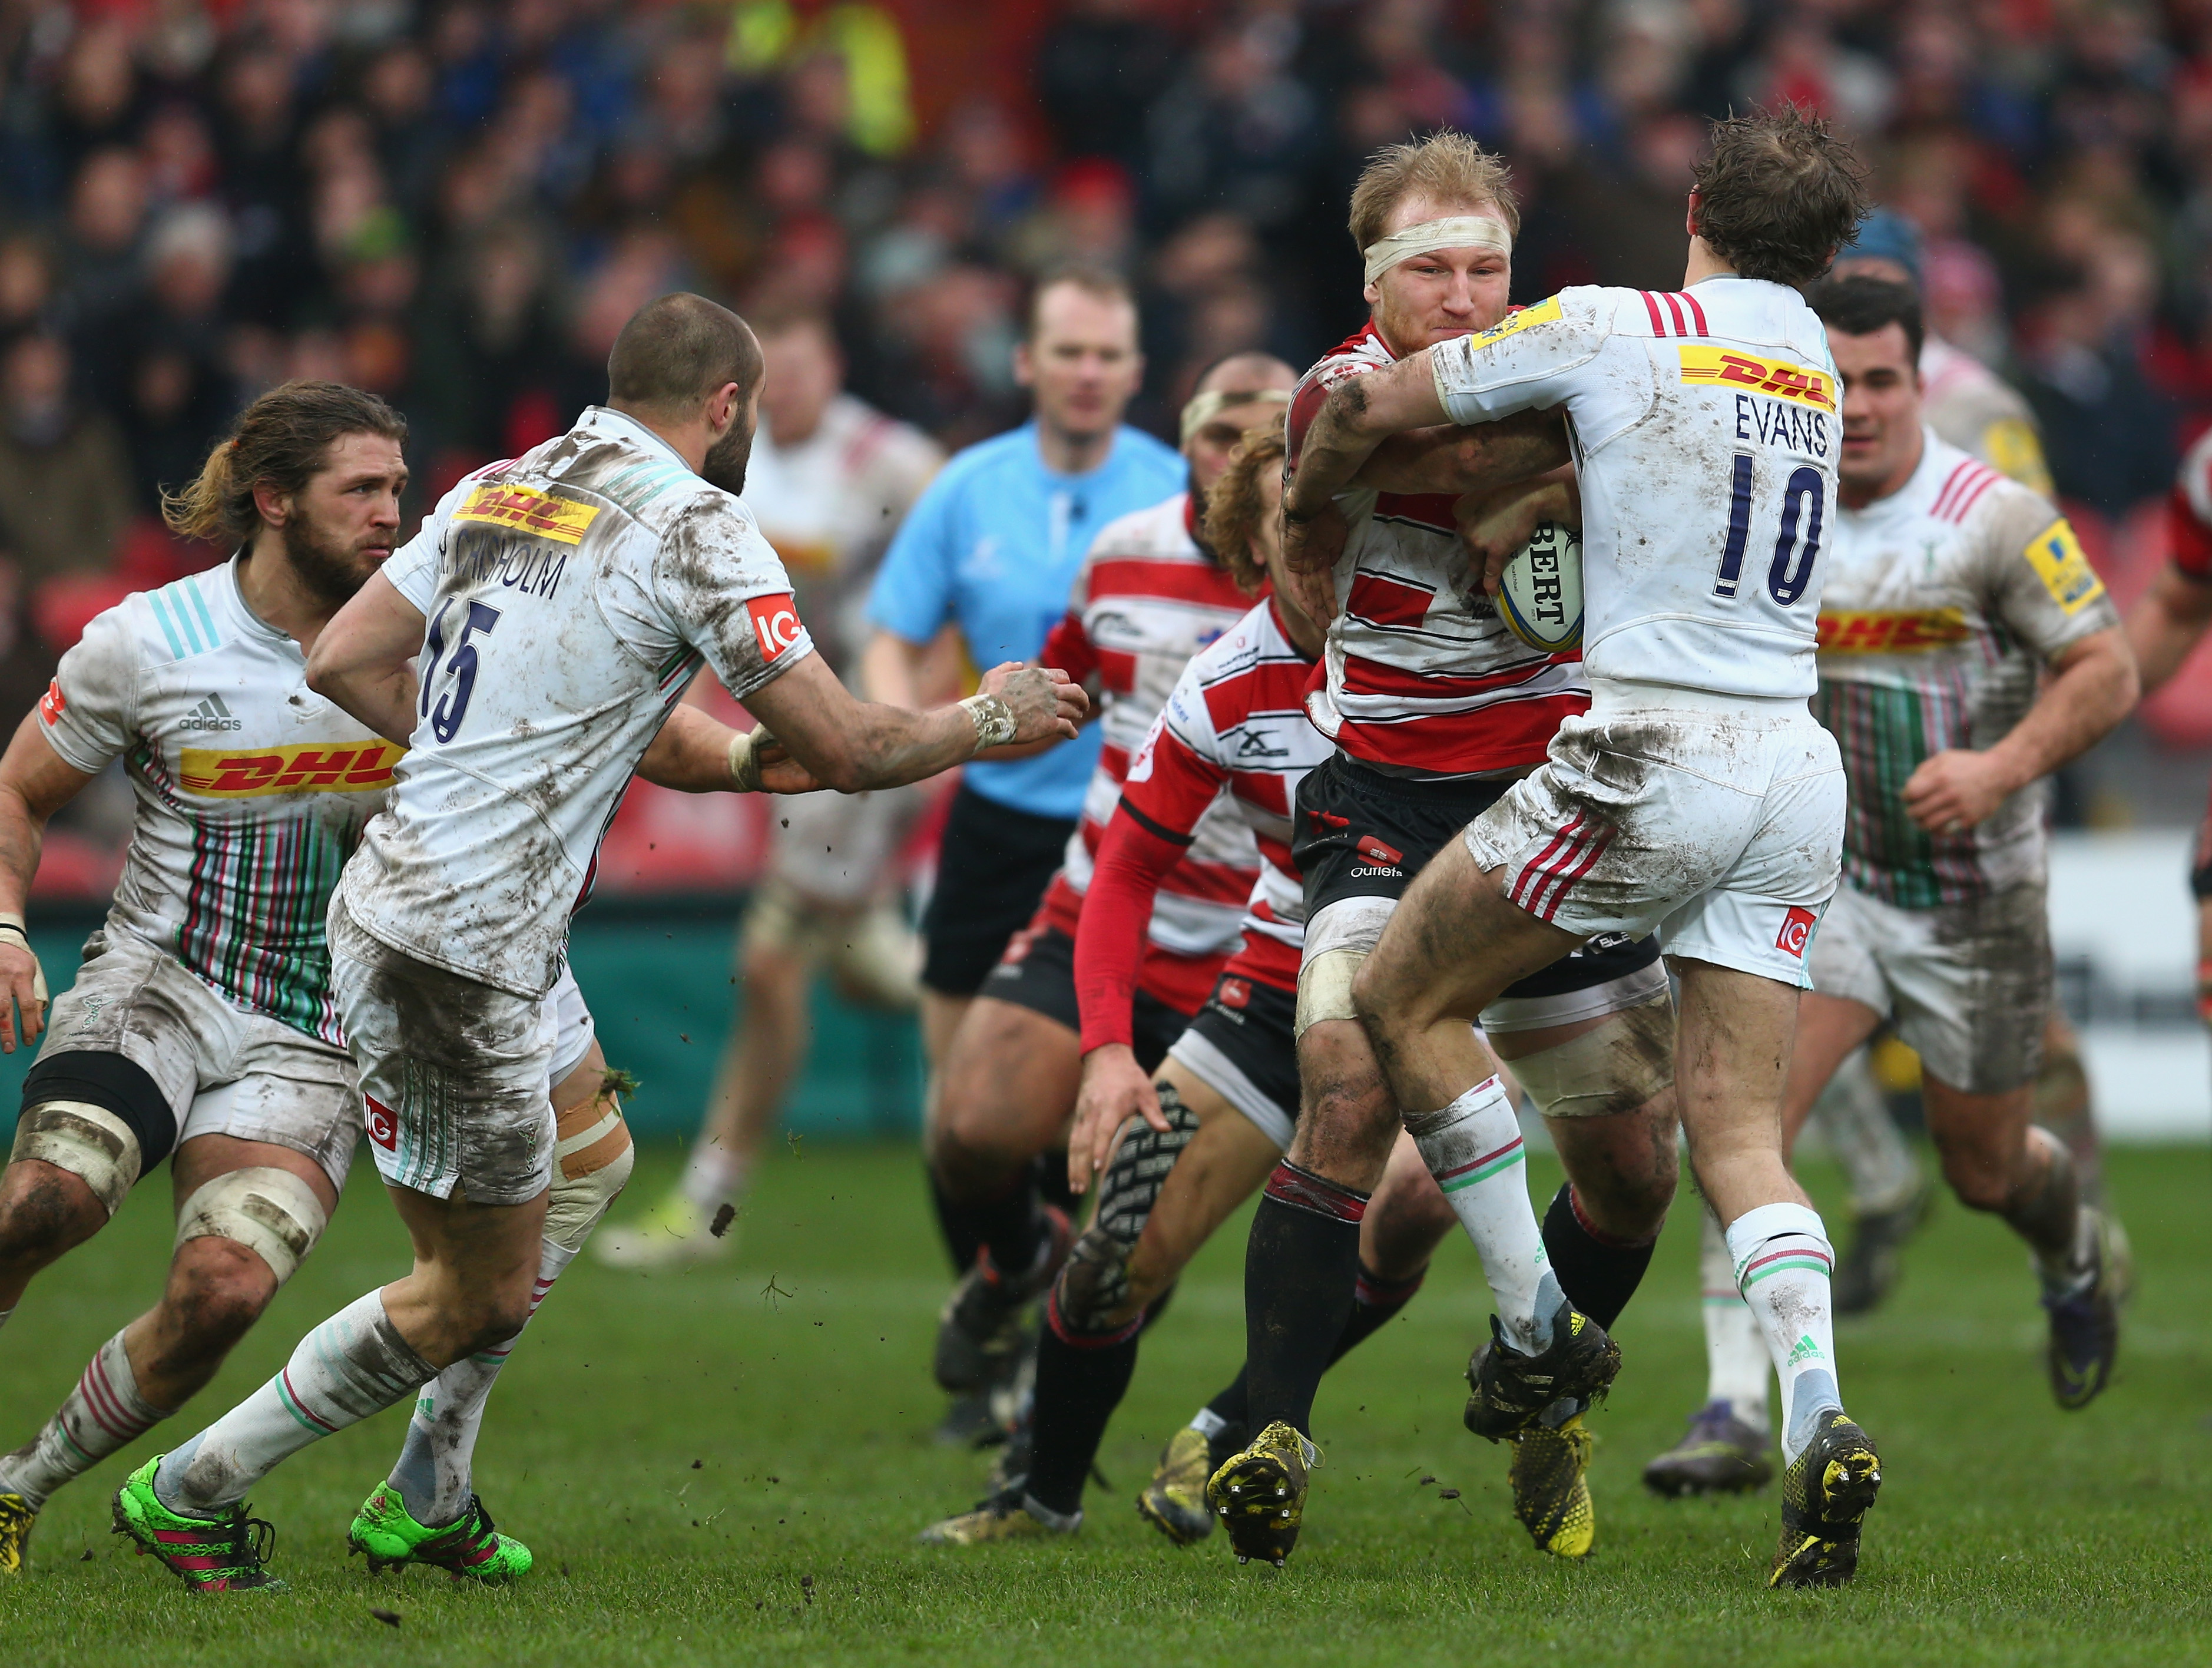 GLOUCESTER, ENGLAND - FEBRUARY 13: Matt Kvesic of Gloucester is stopped by Nick Evans of Quins during the Aviva Premiership match between Gloucester Rugby and Harlequins at Kingsholm Stadium on February 13, 2016 in Gloucester, England. (Photo by Christopher Lee/Getty Images)